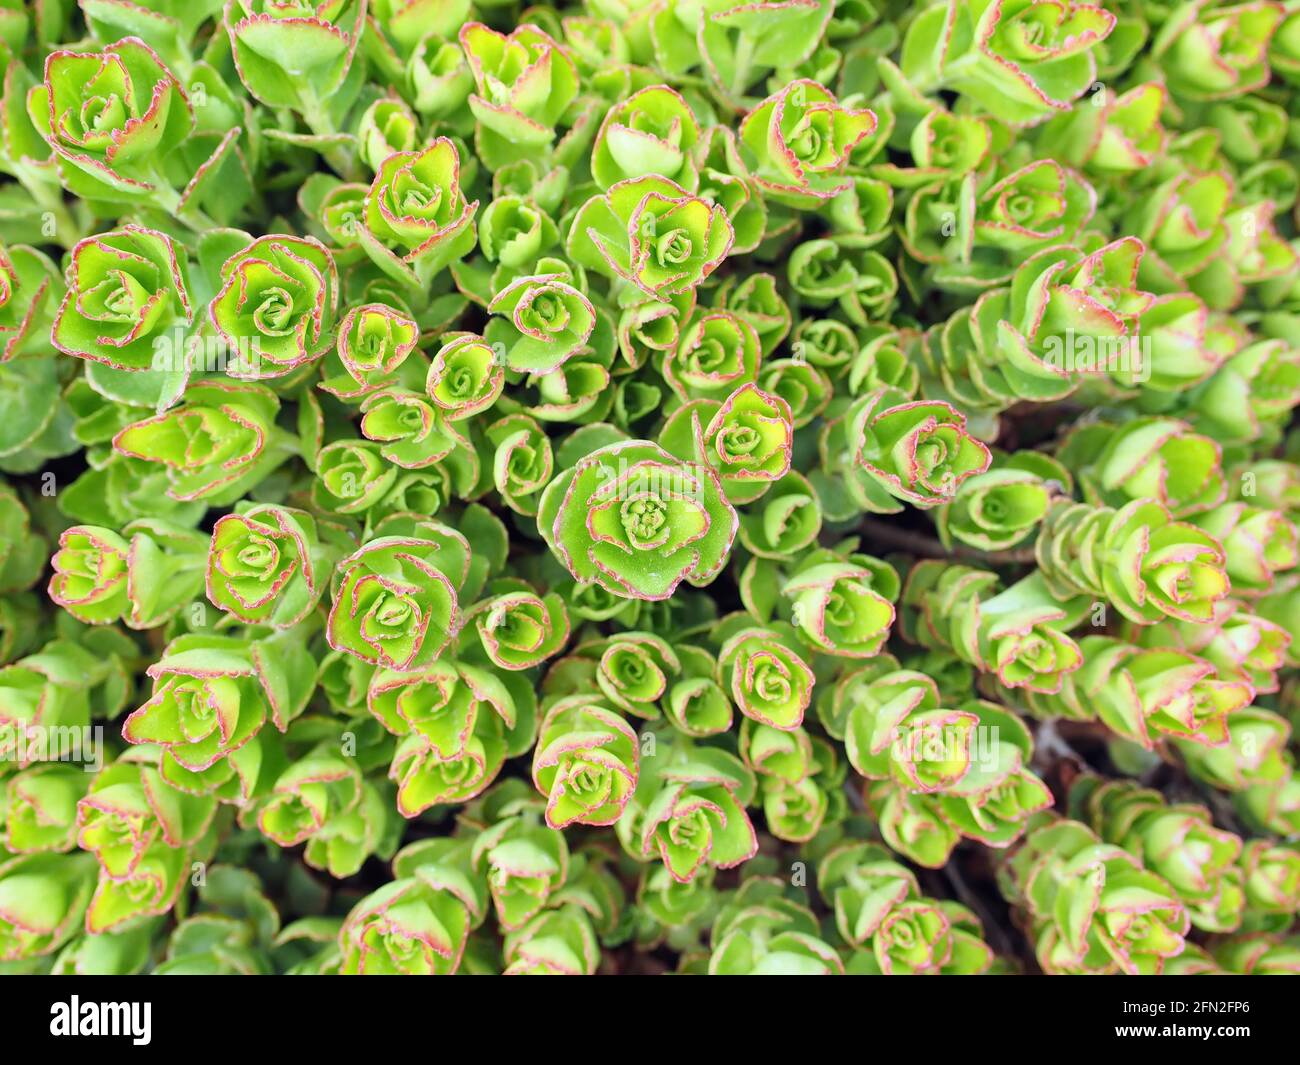 Top view of Sedum tetractinum, also known as Coral Reef, a perennial succulent often used as ground cover and in rock gardens. Beautiful, fresh, green Stock Photo